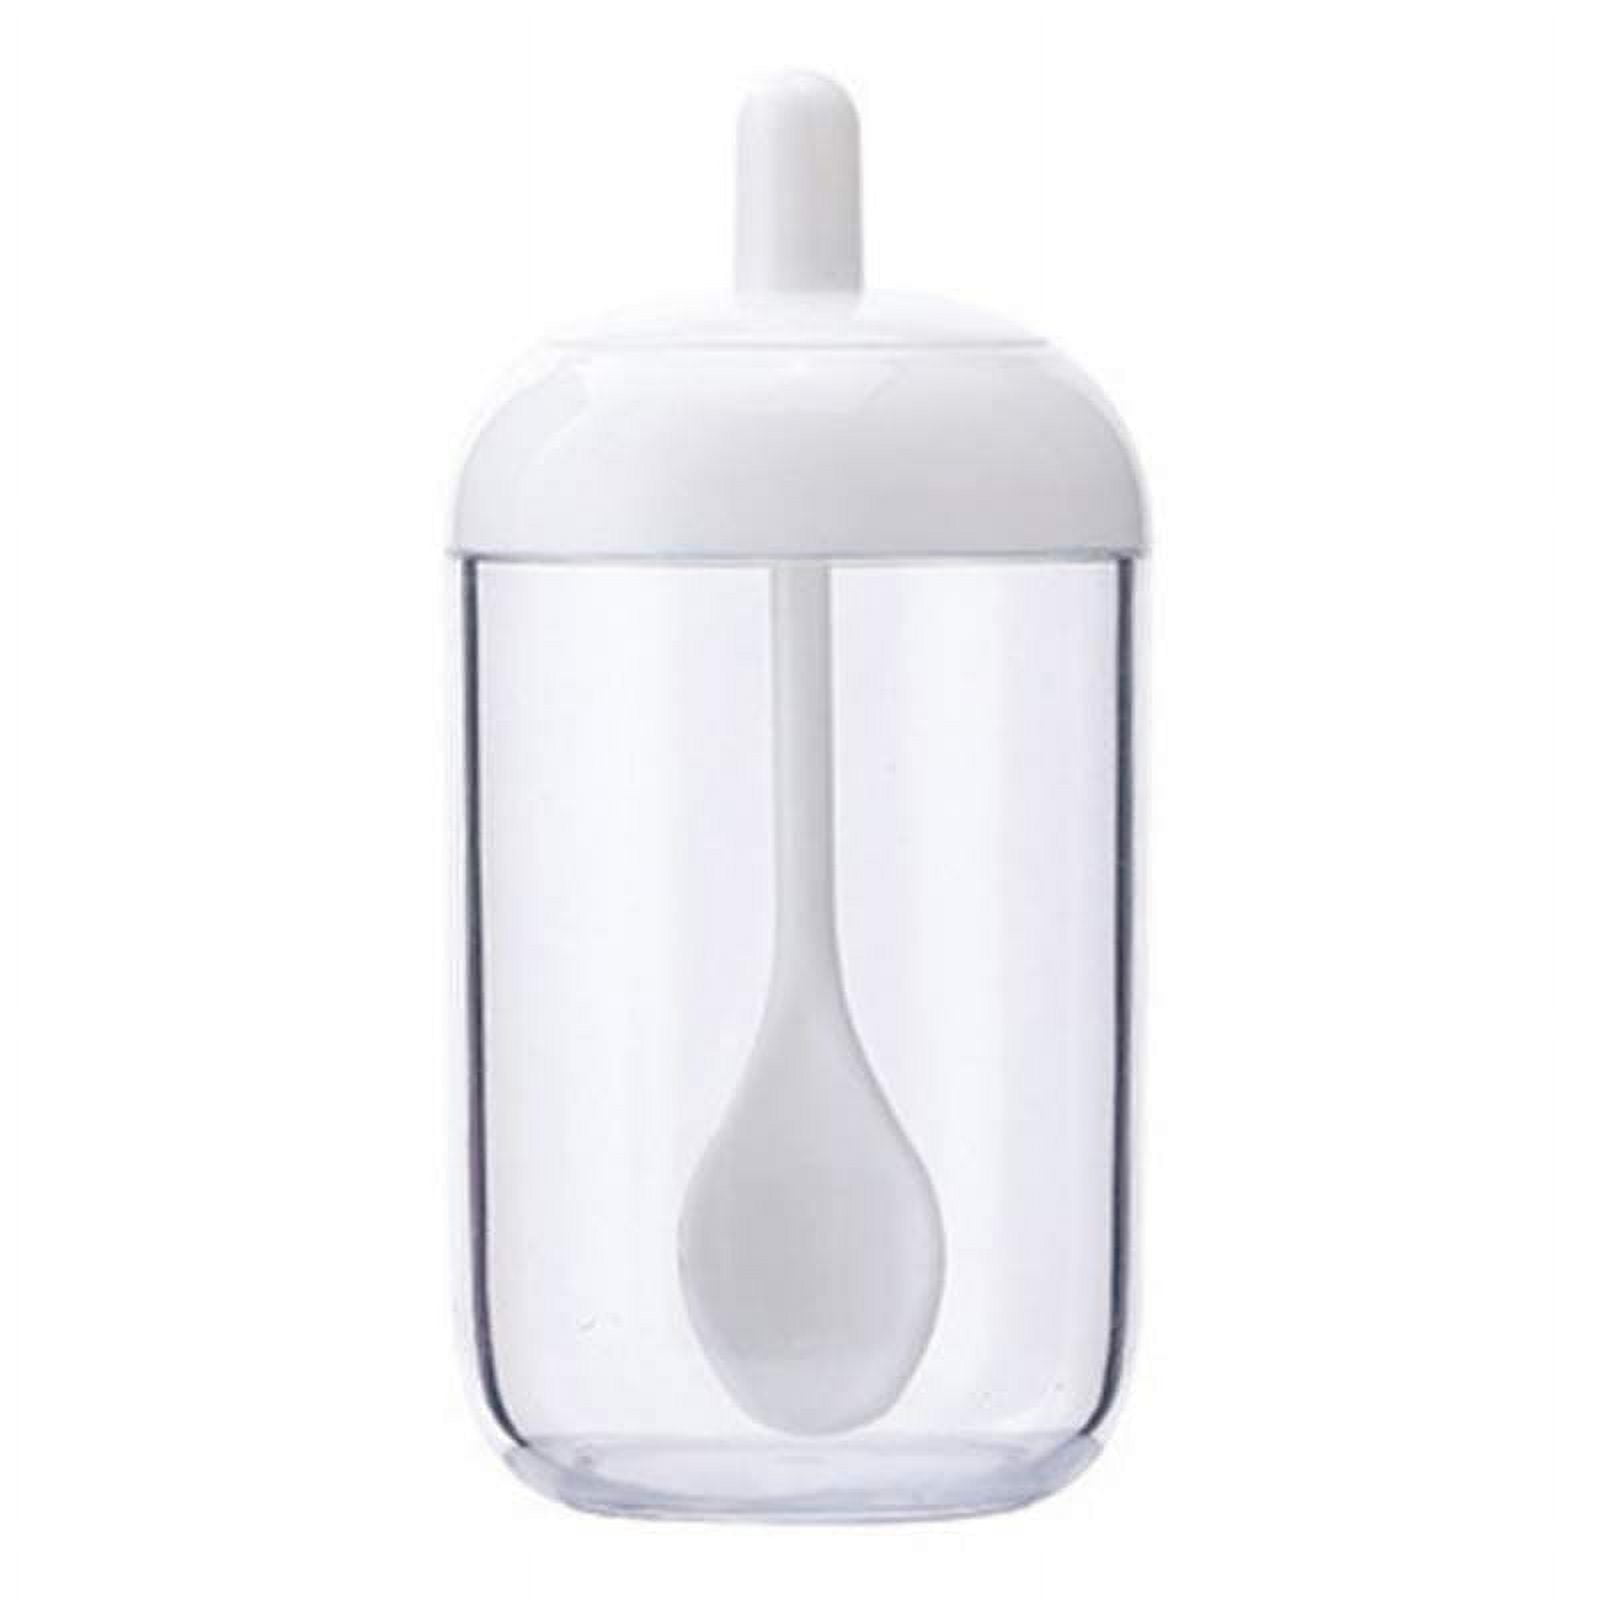 Hasense Porcelain Condiment Jar,10oz Spice Container with Lid